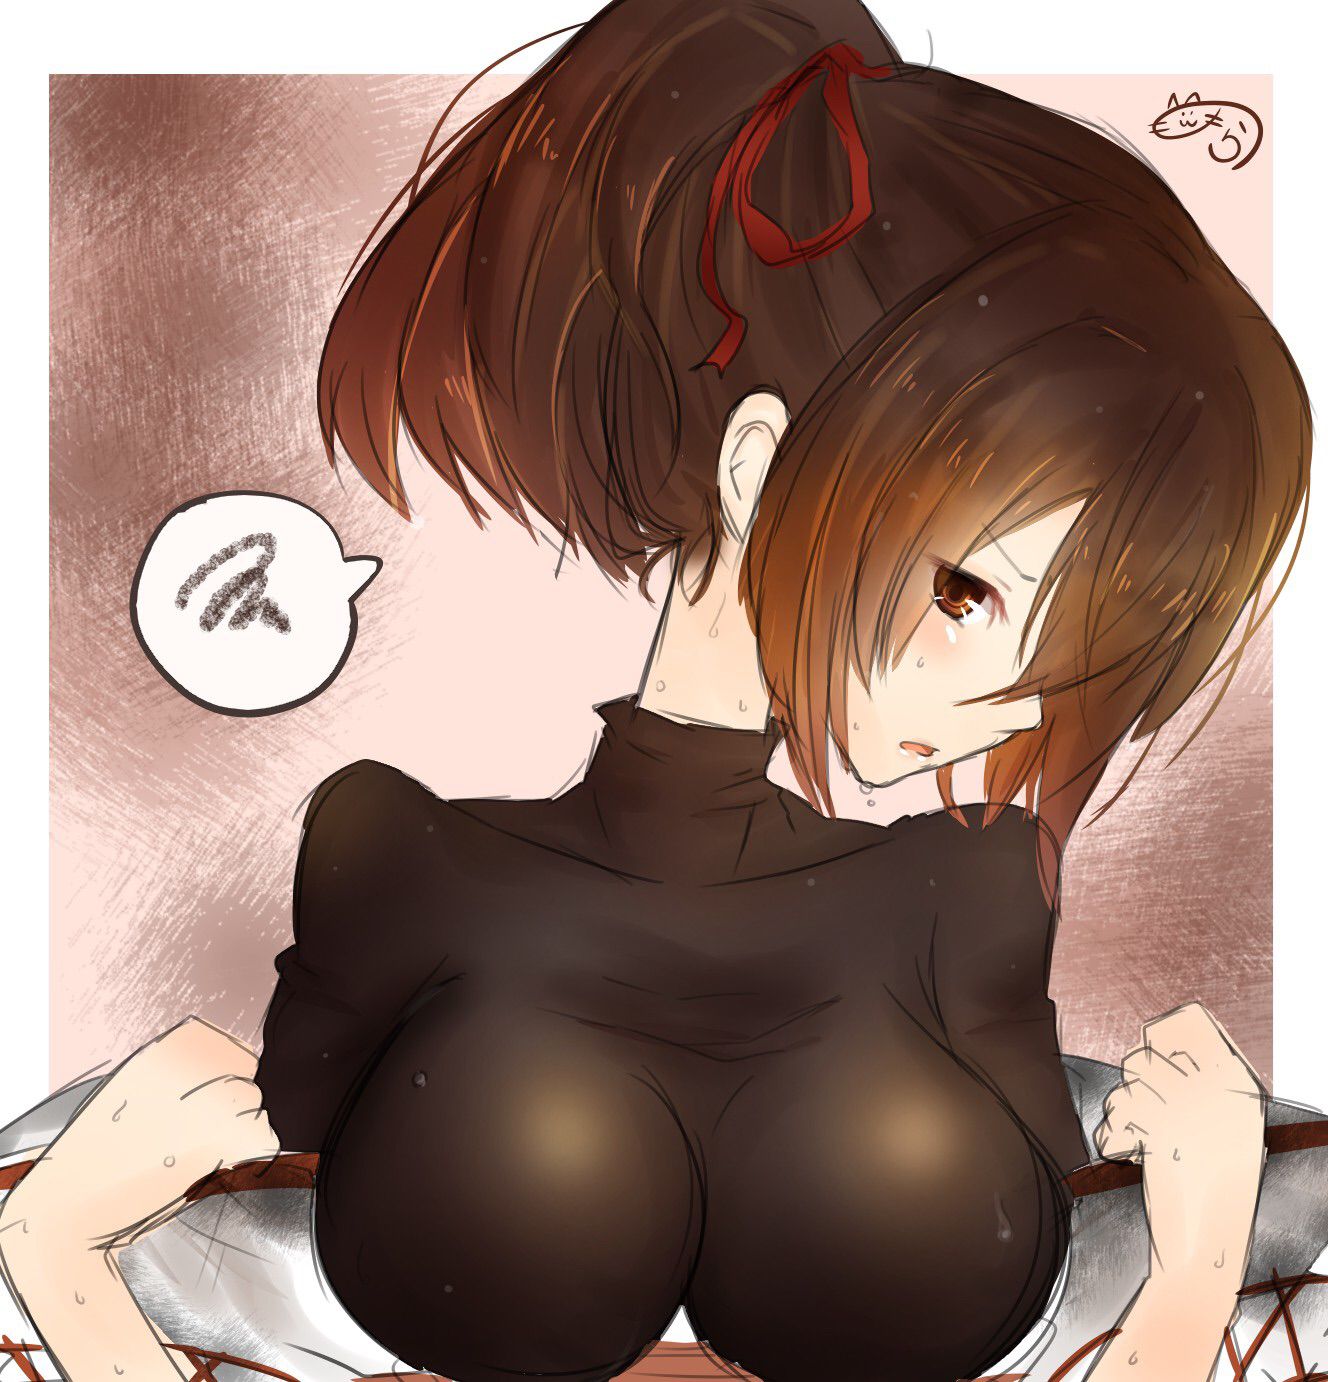 [Secondary, ZIP] ship and then kunnkakunnka black inner this image summary of the ISE-CHAN 42